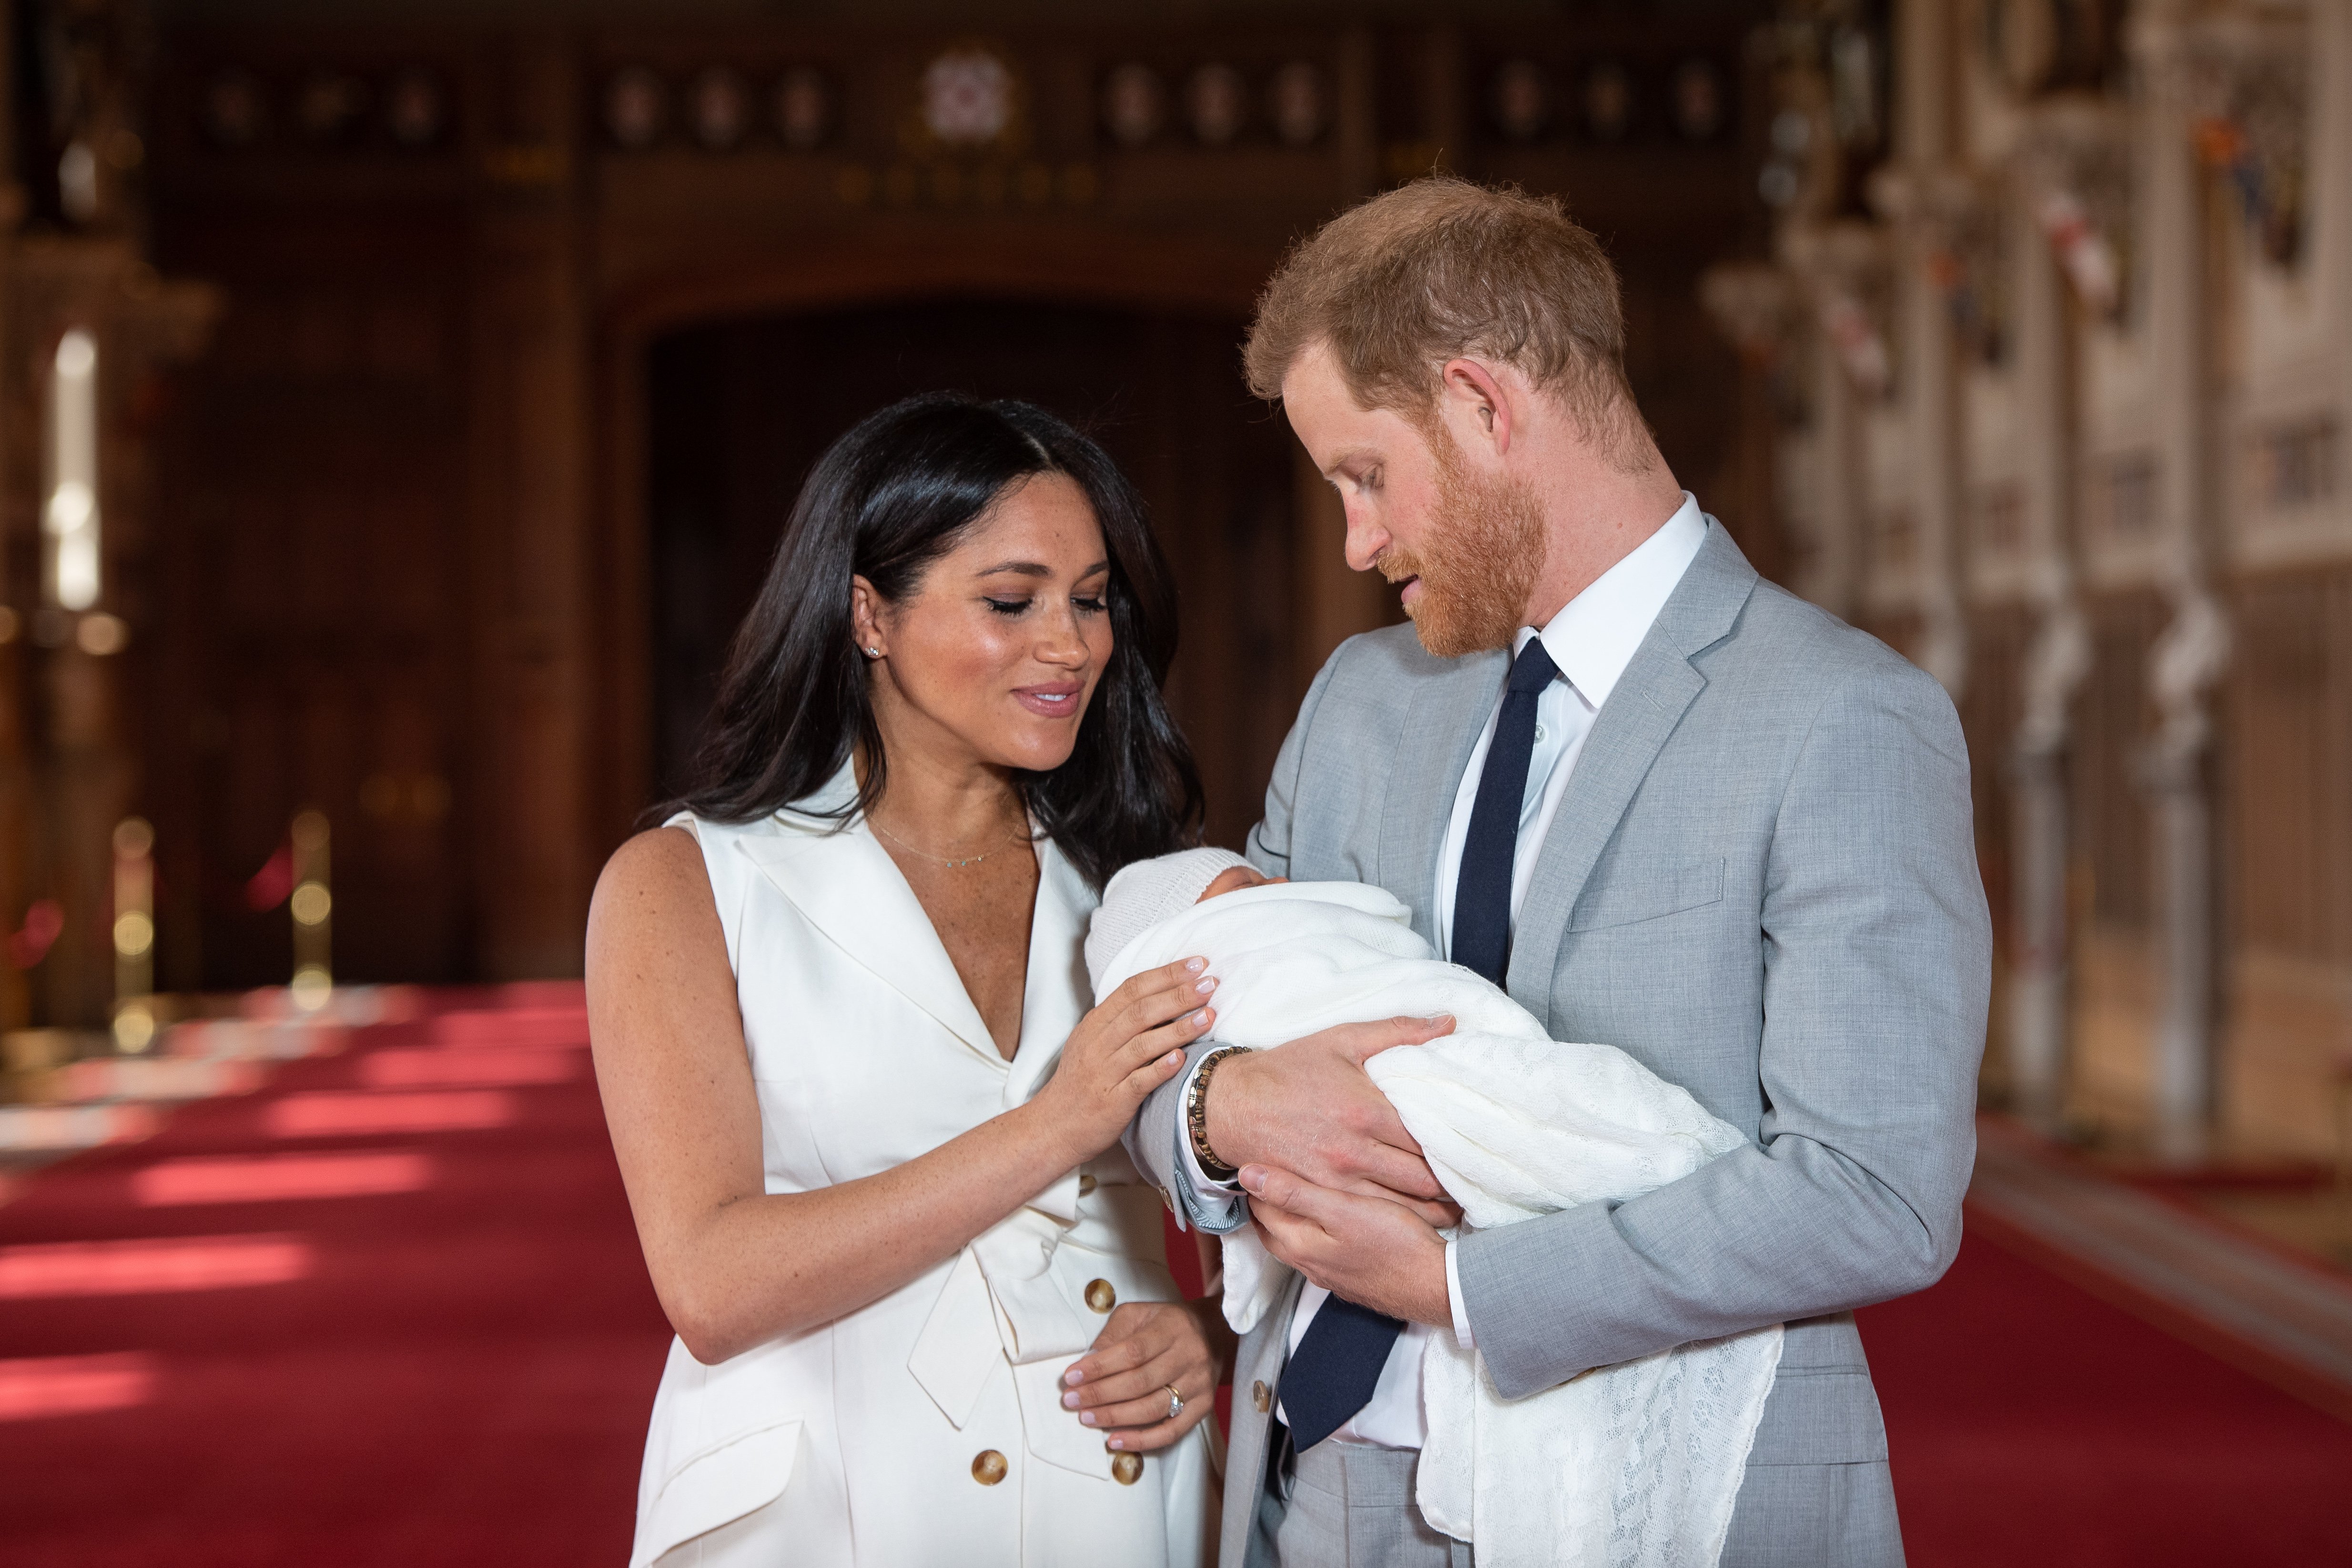 Prince Harry and Meghan Markle with their son Archie in St George's Hall at Windsor Castle on May 8, 2019, in Windsor, England. | Source: Getty Images.